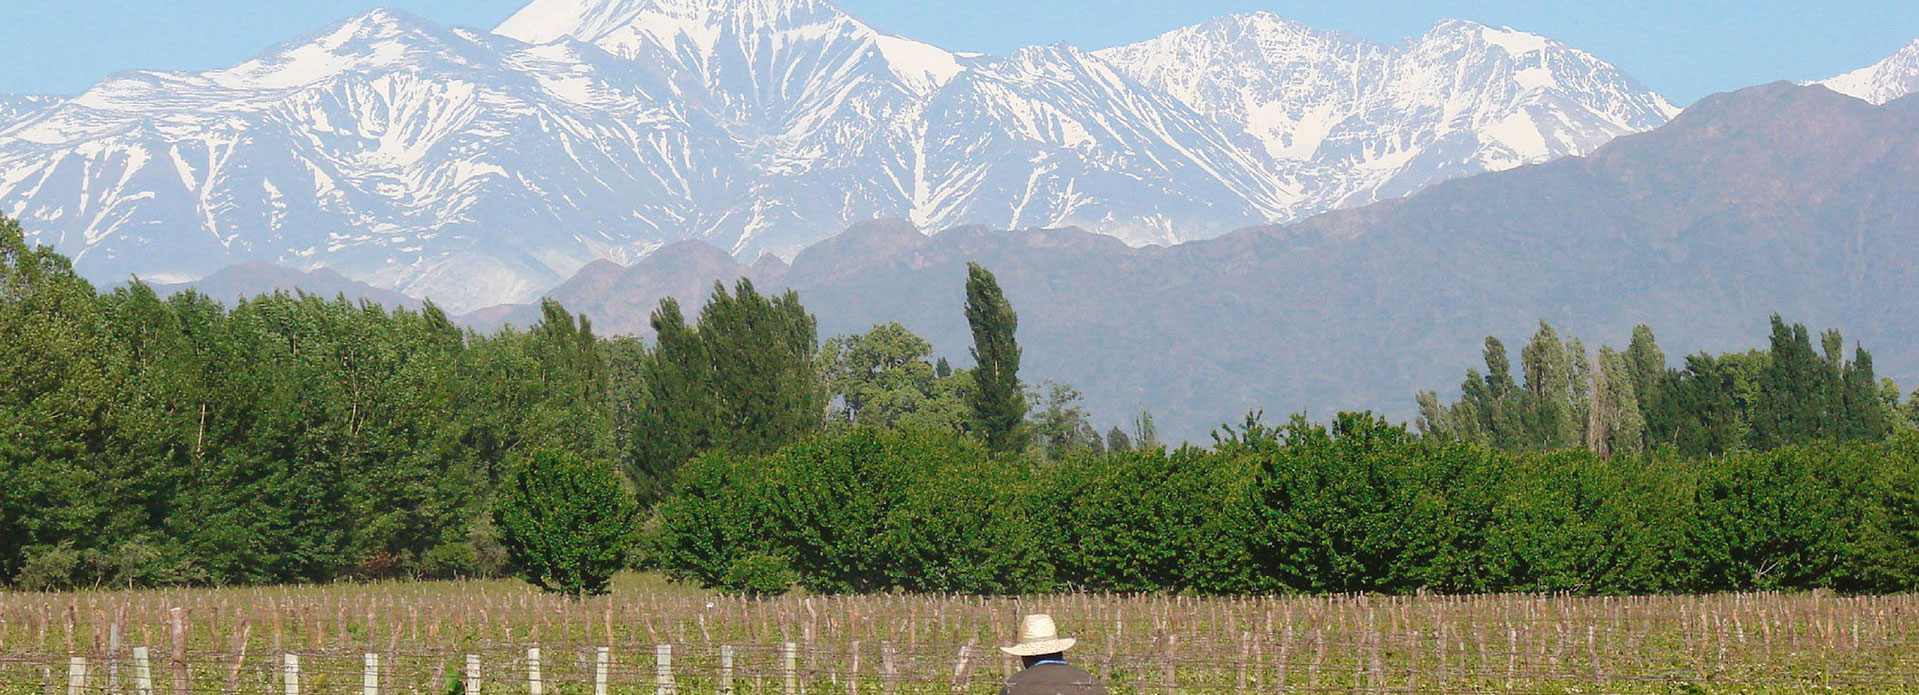 The snowcapped Andes Mountain range as seen from the organic vineyards of Caligiore winery in Mendoza, Argentina.